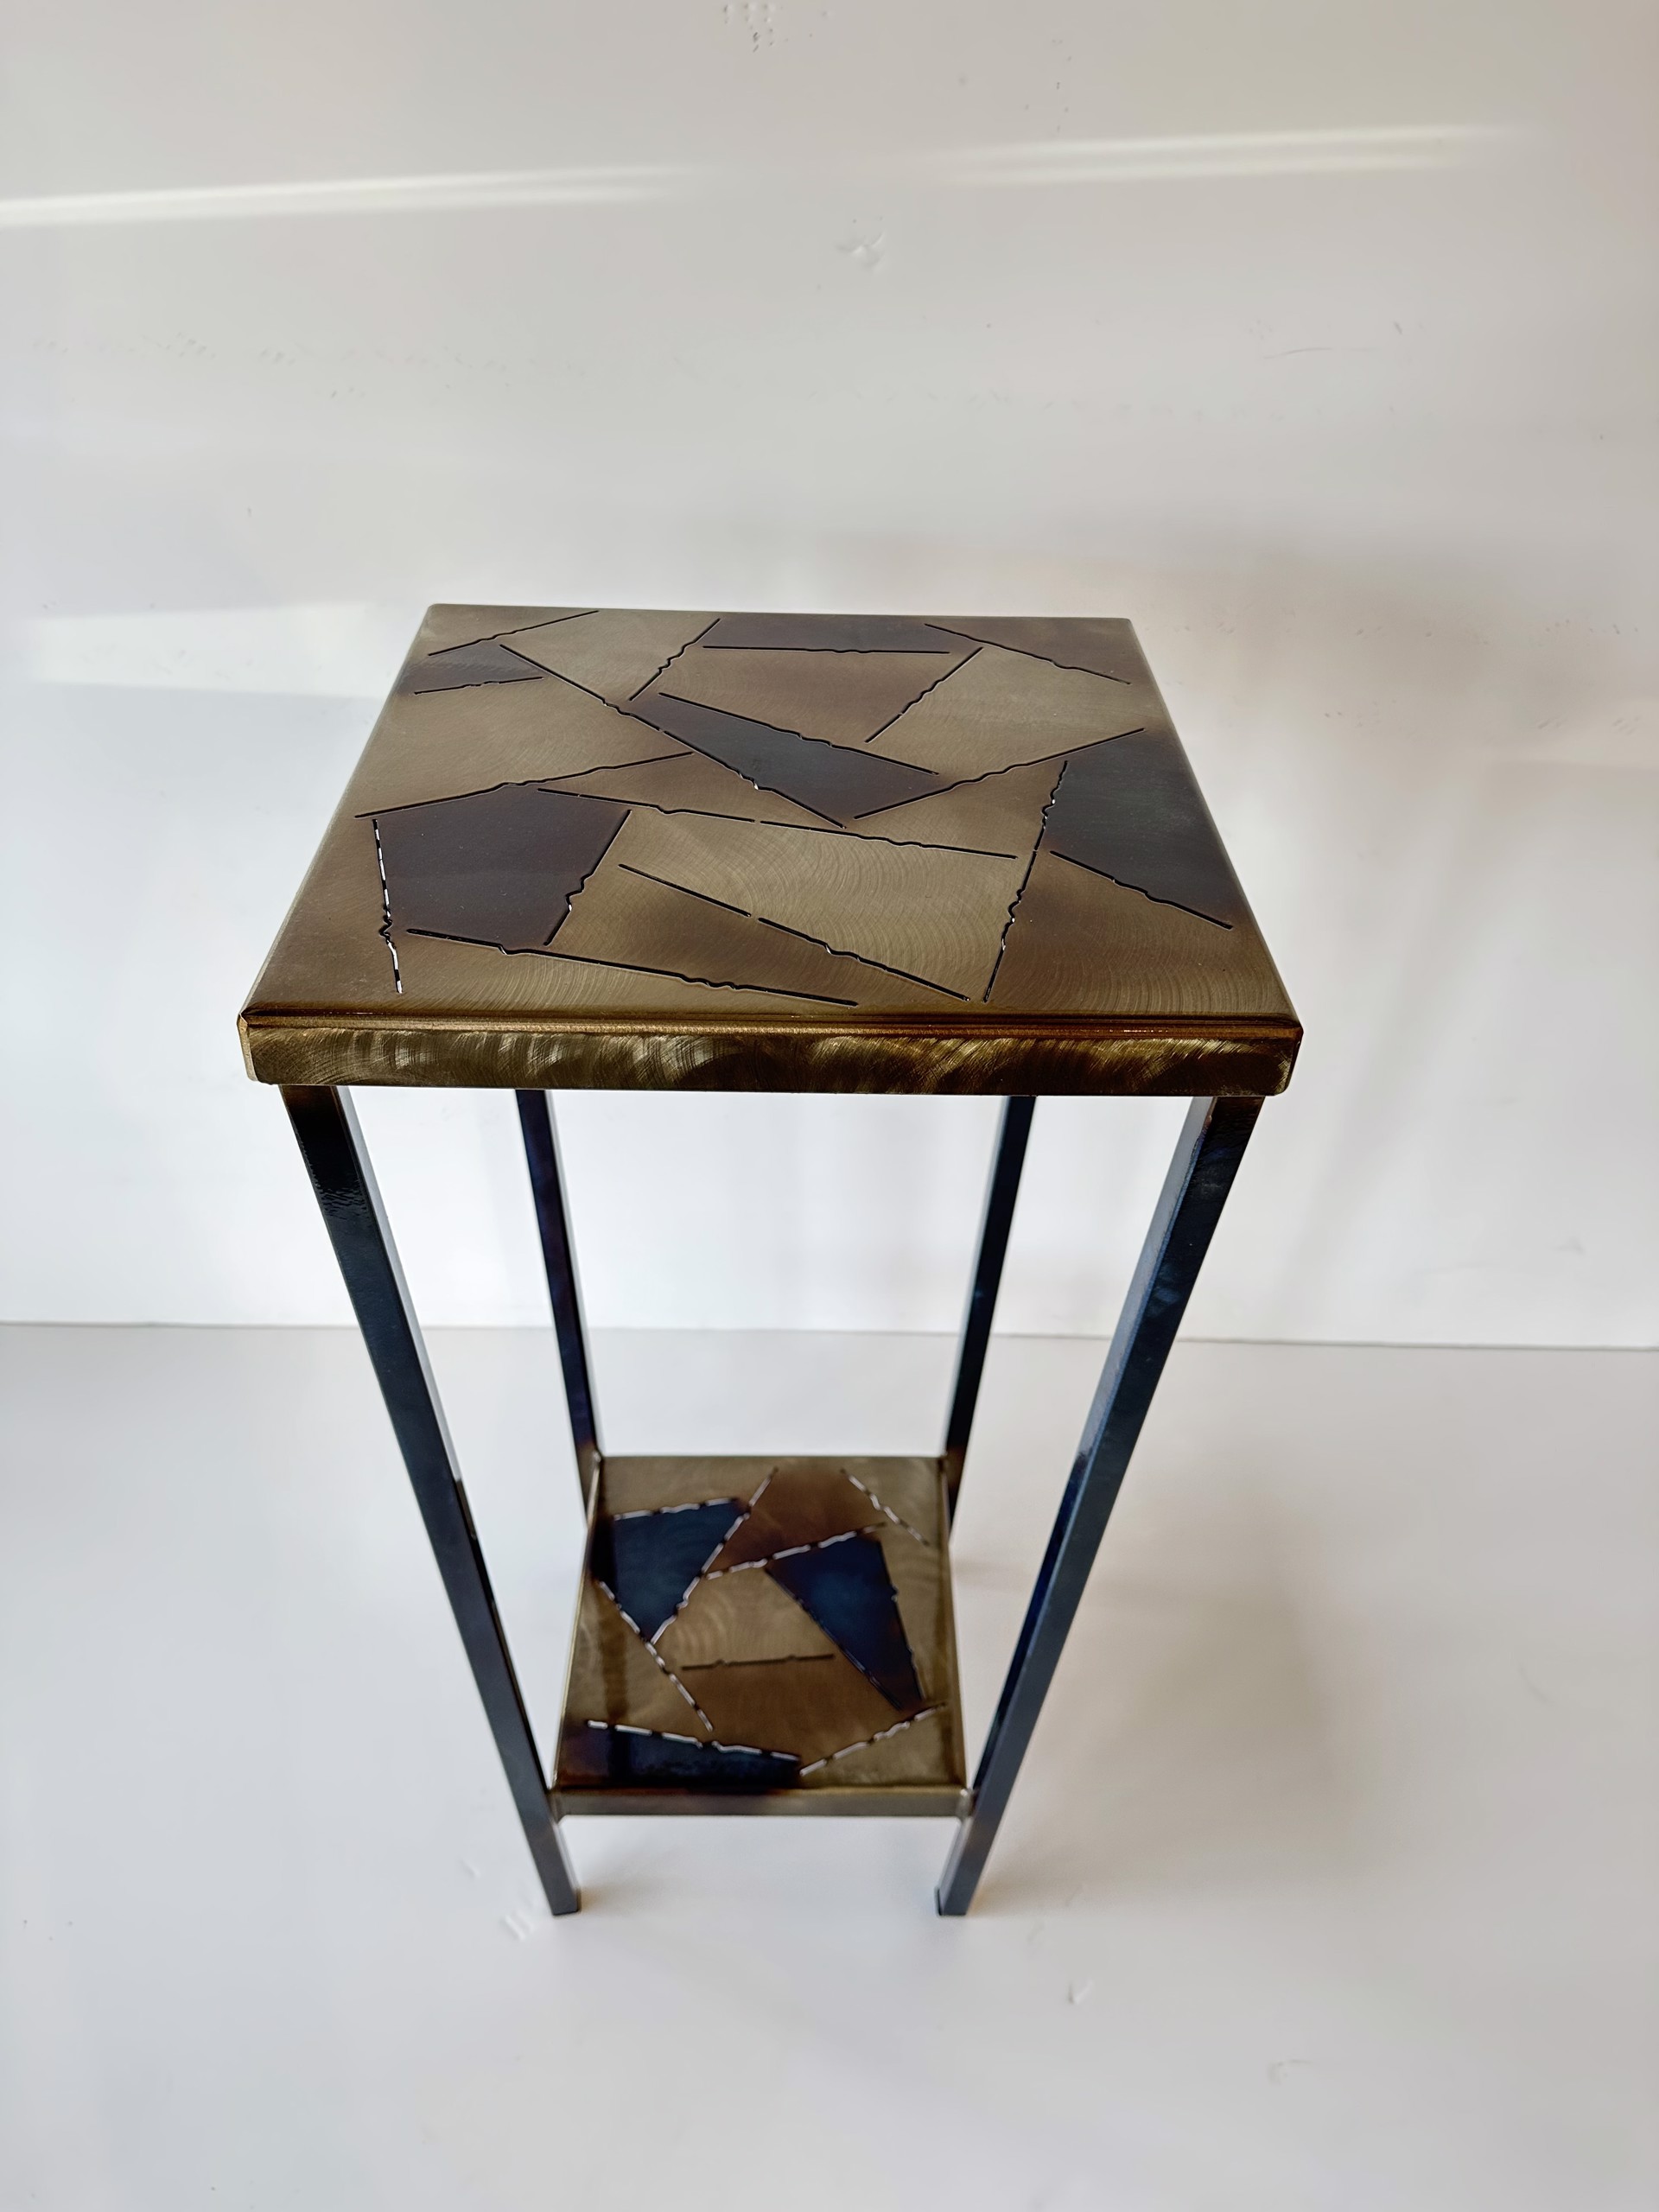 Tall Square Table by Frank Seckler